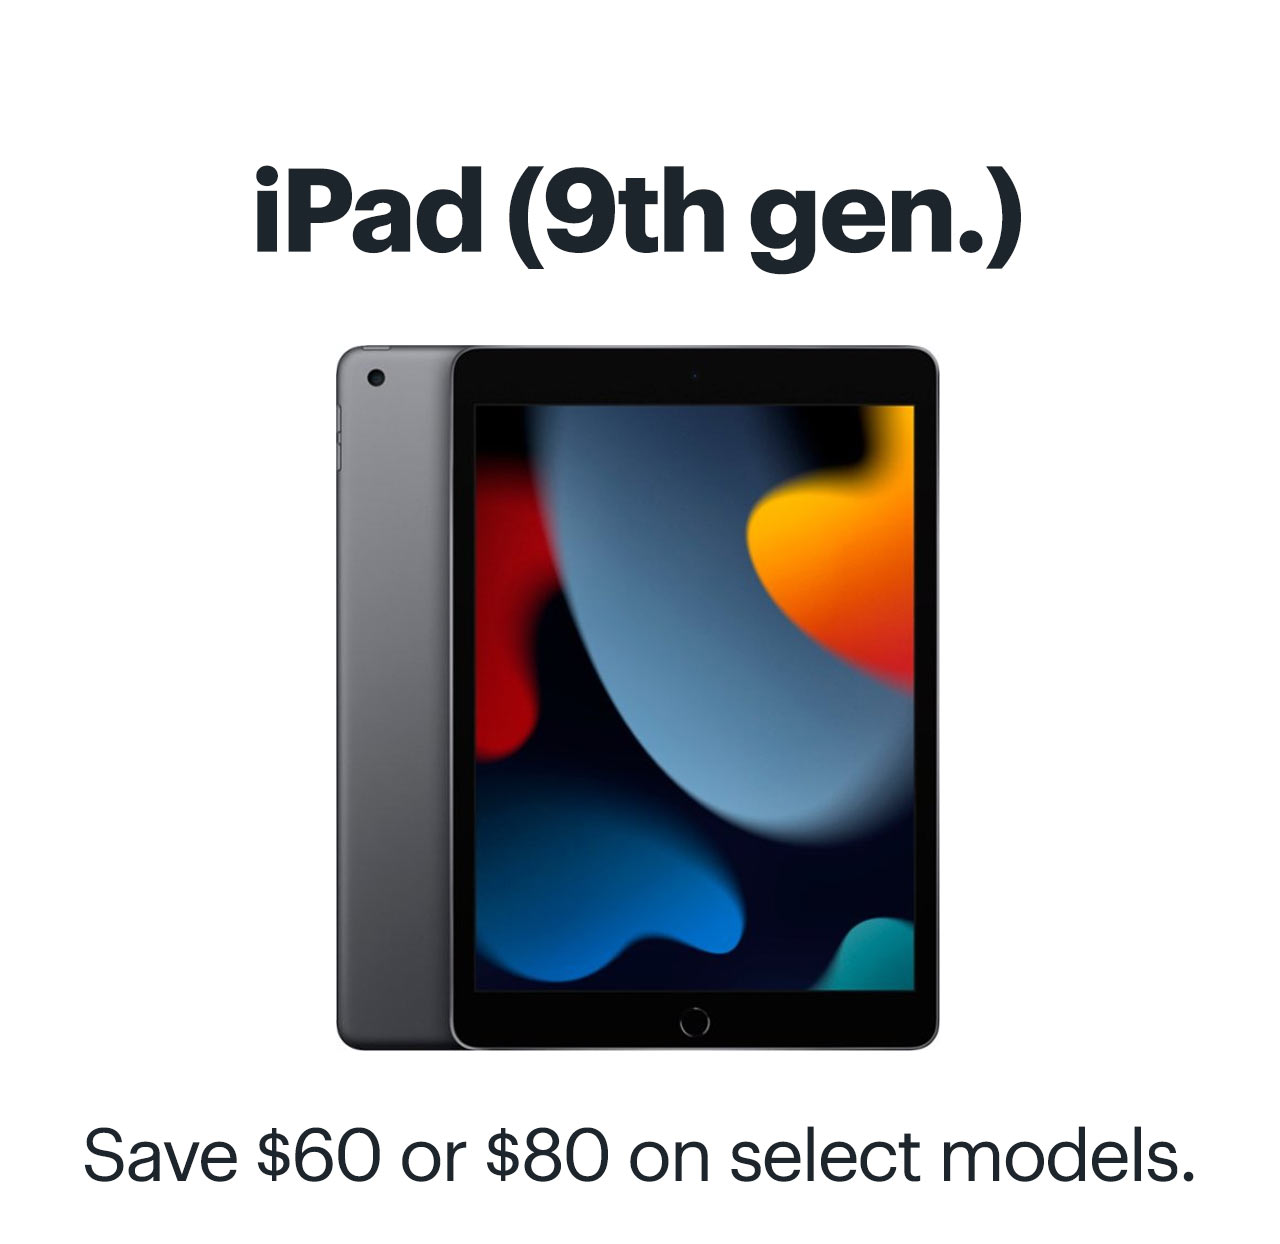 iPad 9th generation. Save $60 or $80 on select models.